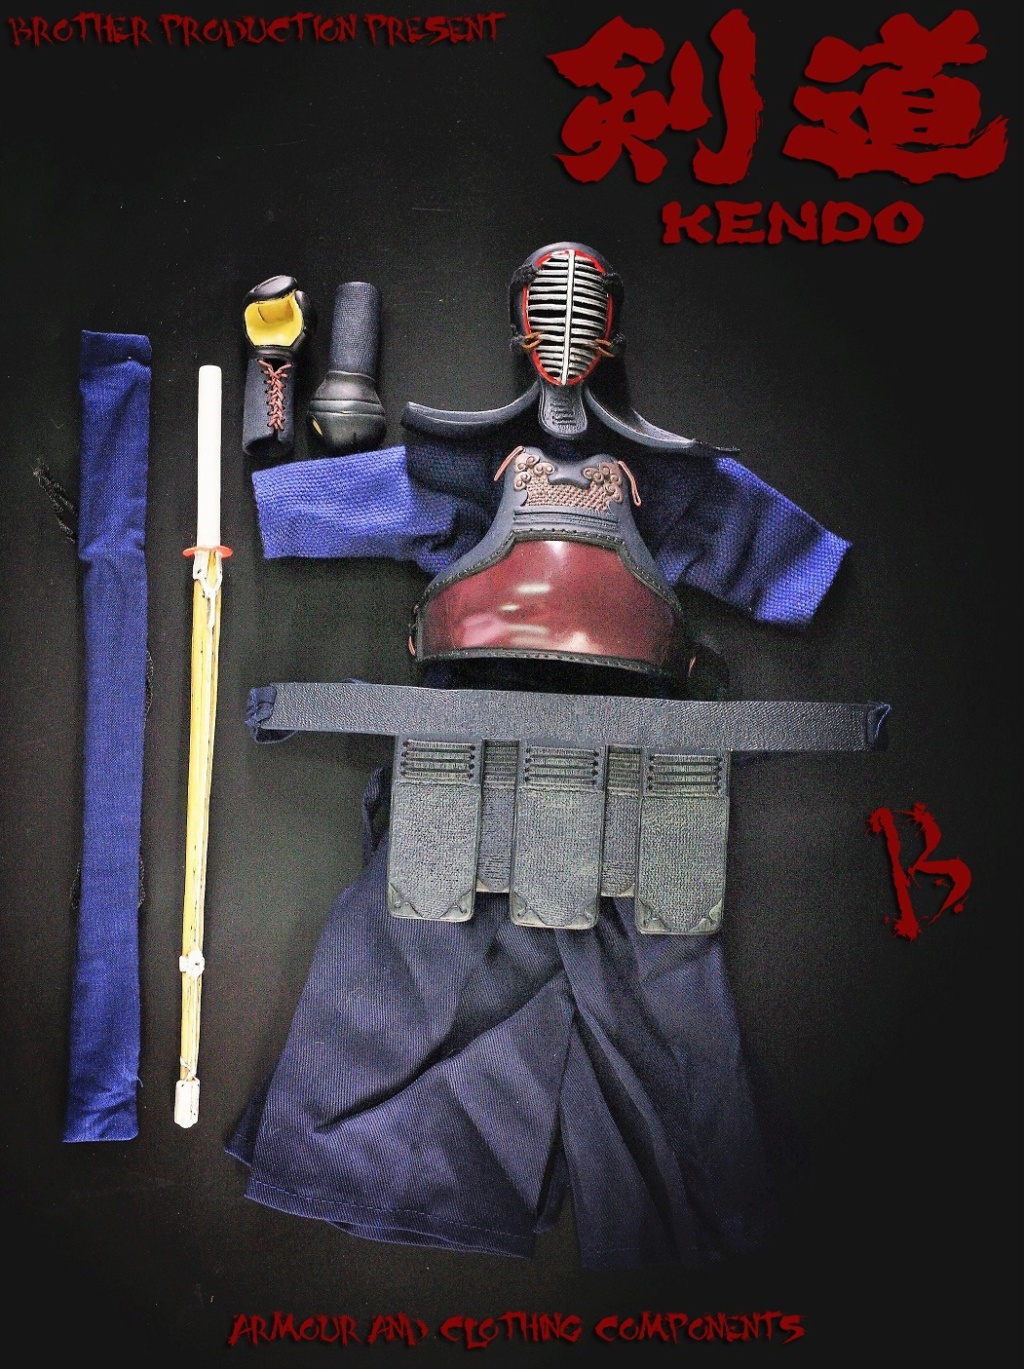 Kendo - NEW PRODUCT: Brother Production: 1/6 Kendo - Armor Costume Set 15530010